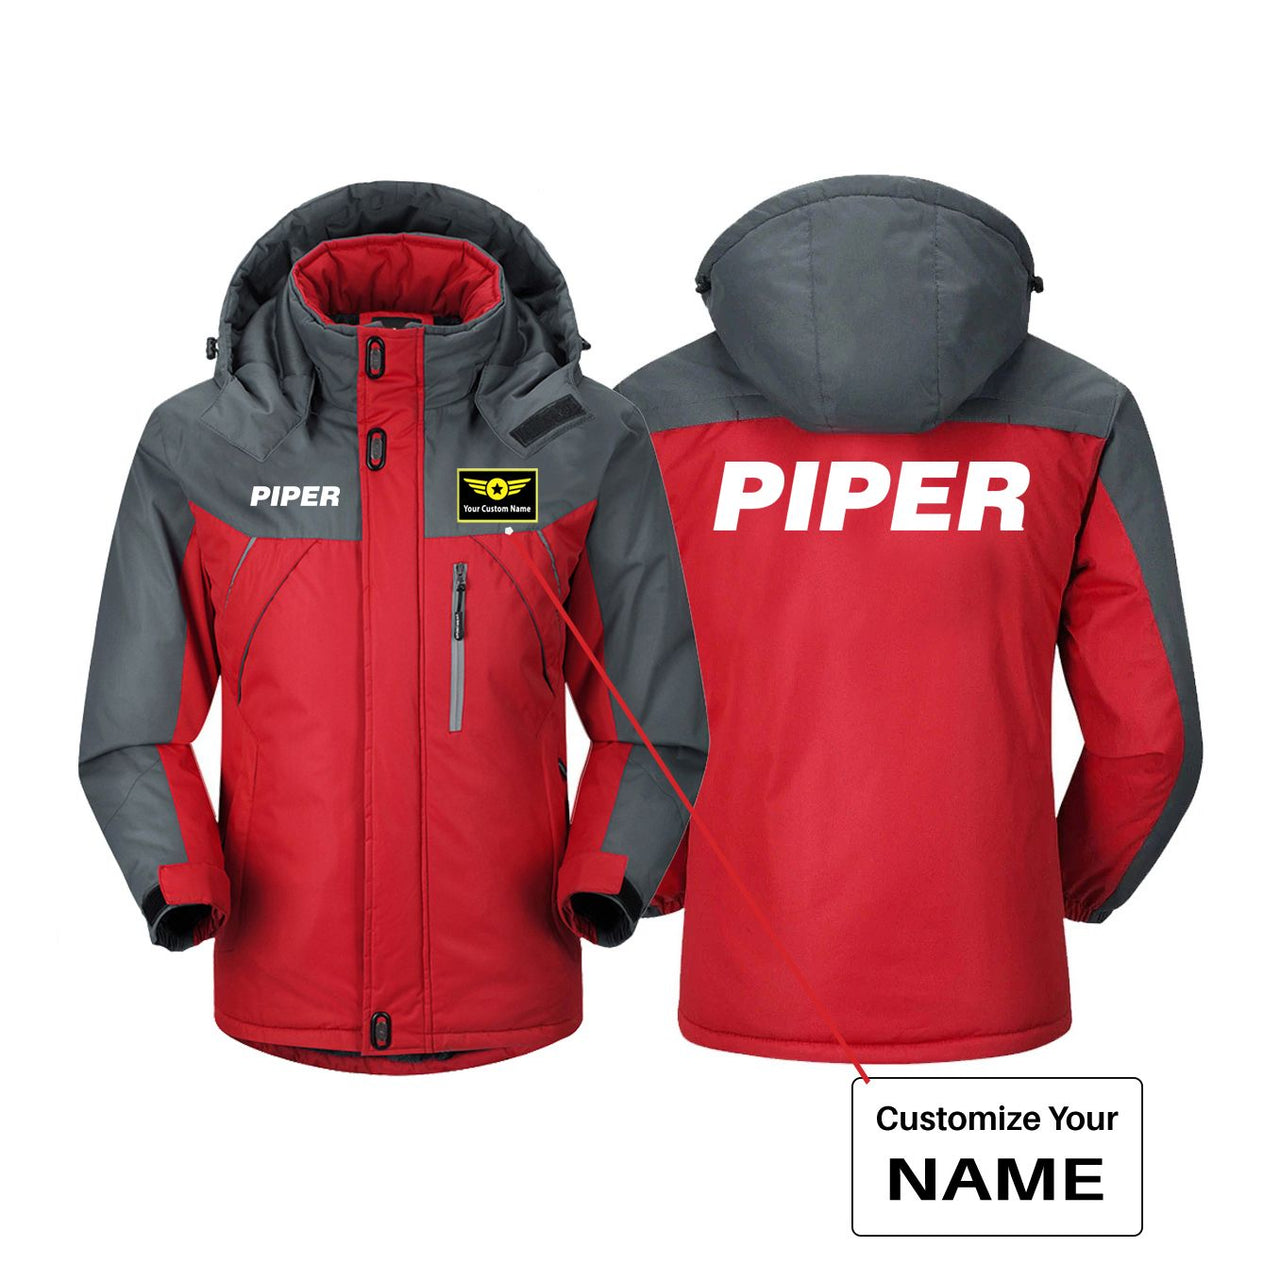 Piper & Text Designed Thick Winter Jackets